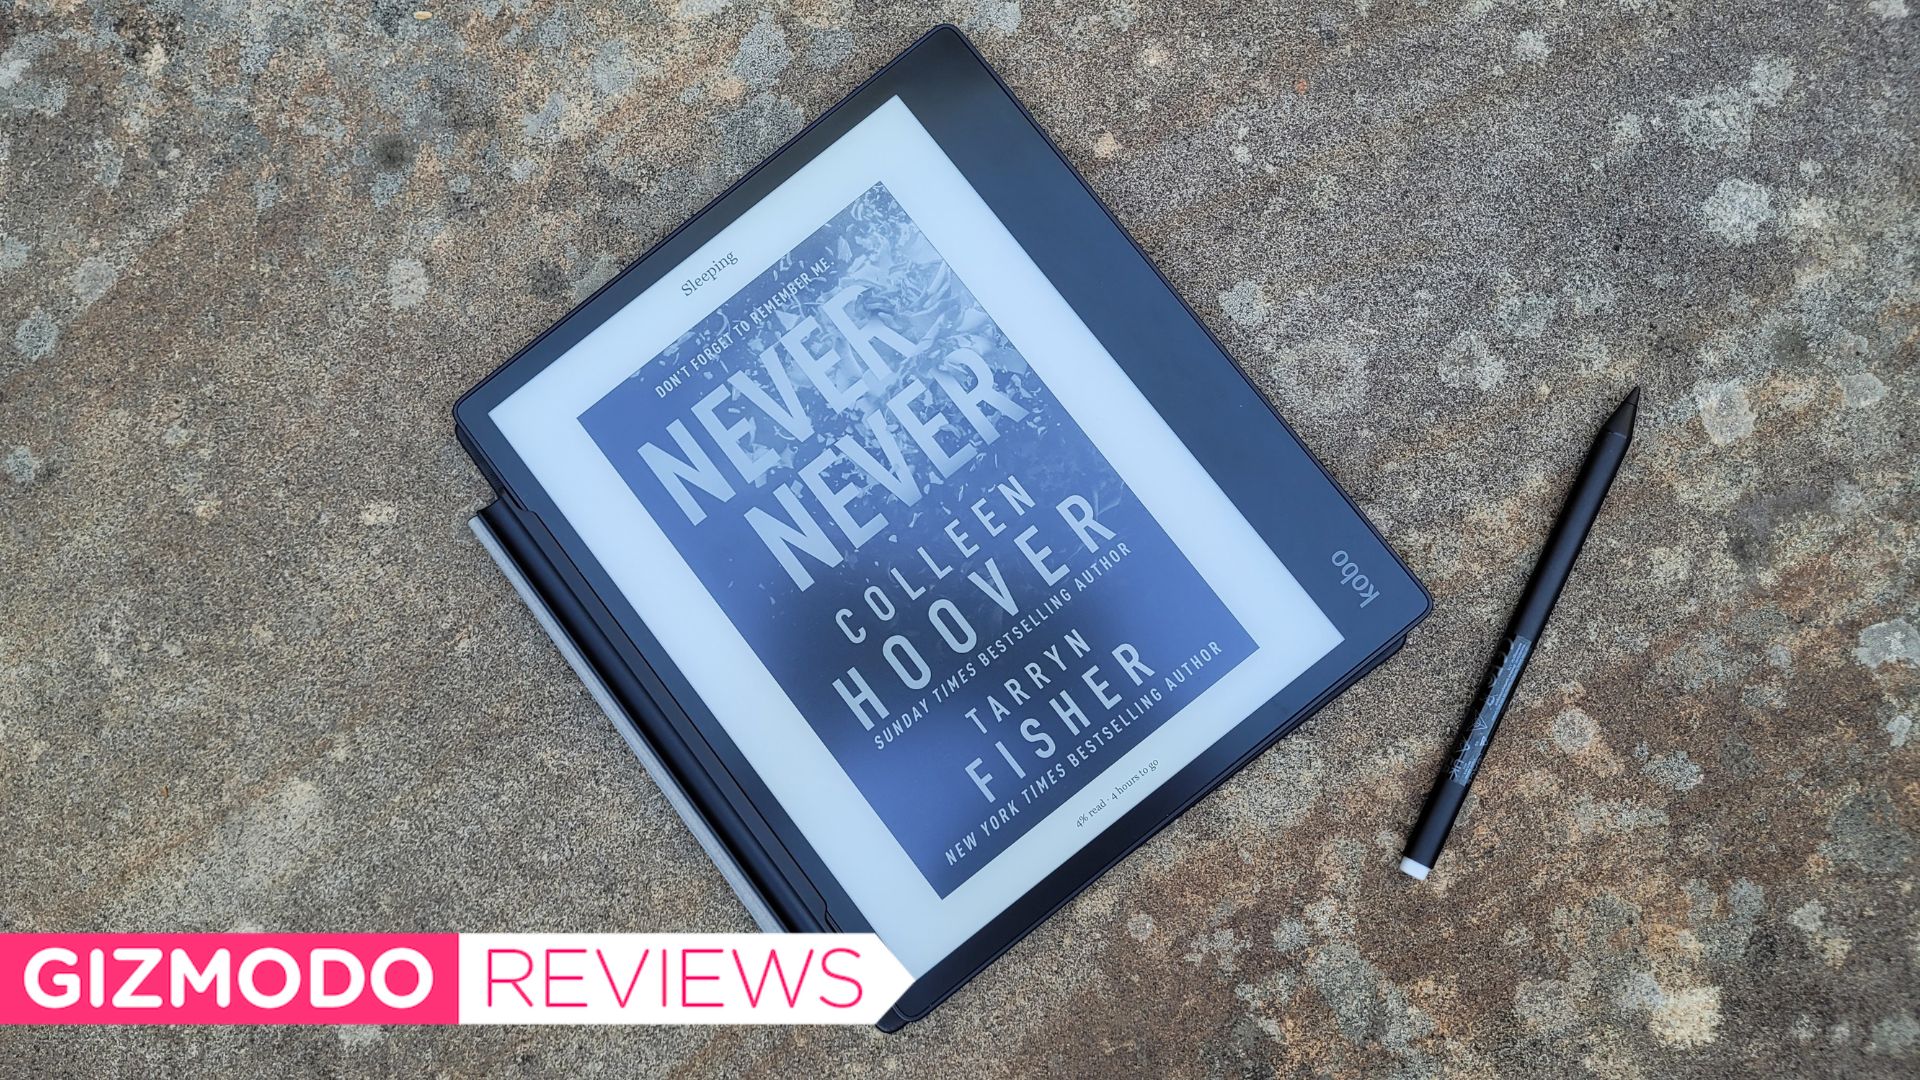 Kobo Elipsa 2E Review: This eReader is Very Expensive, But Very Worth It